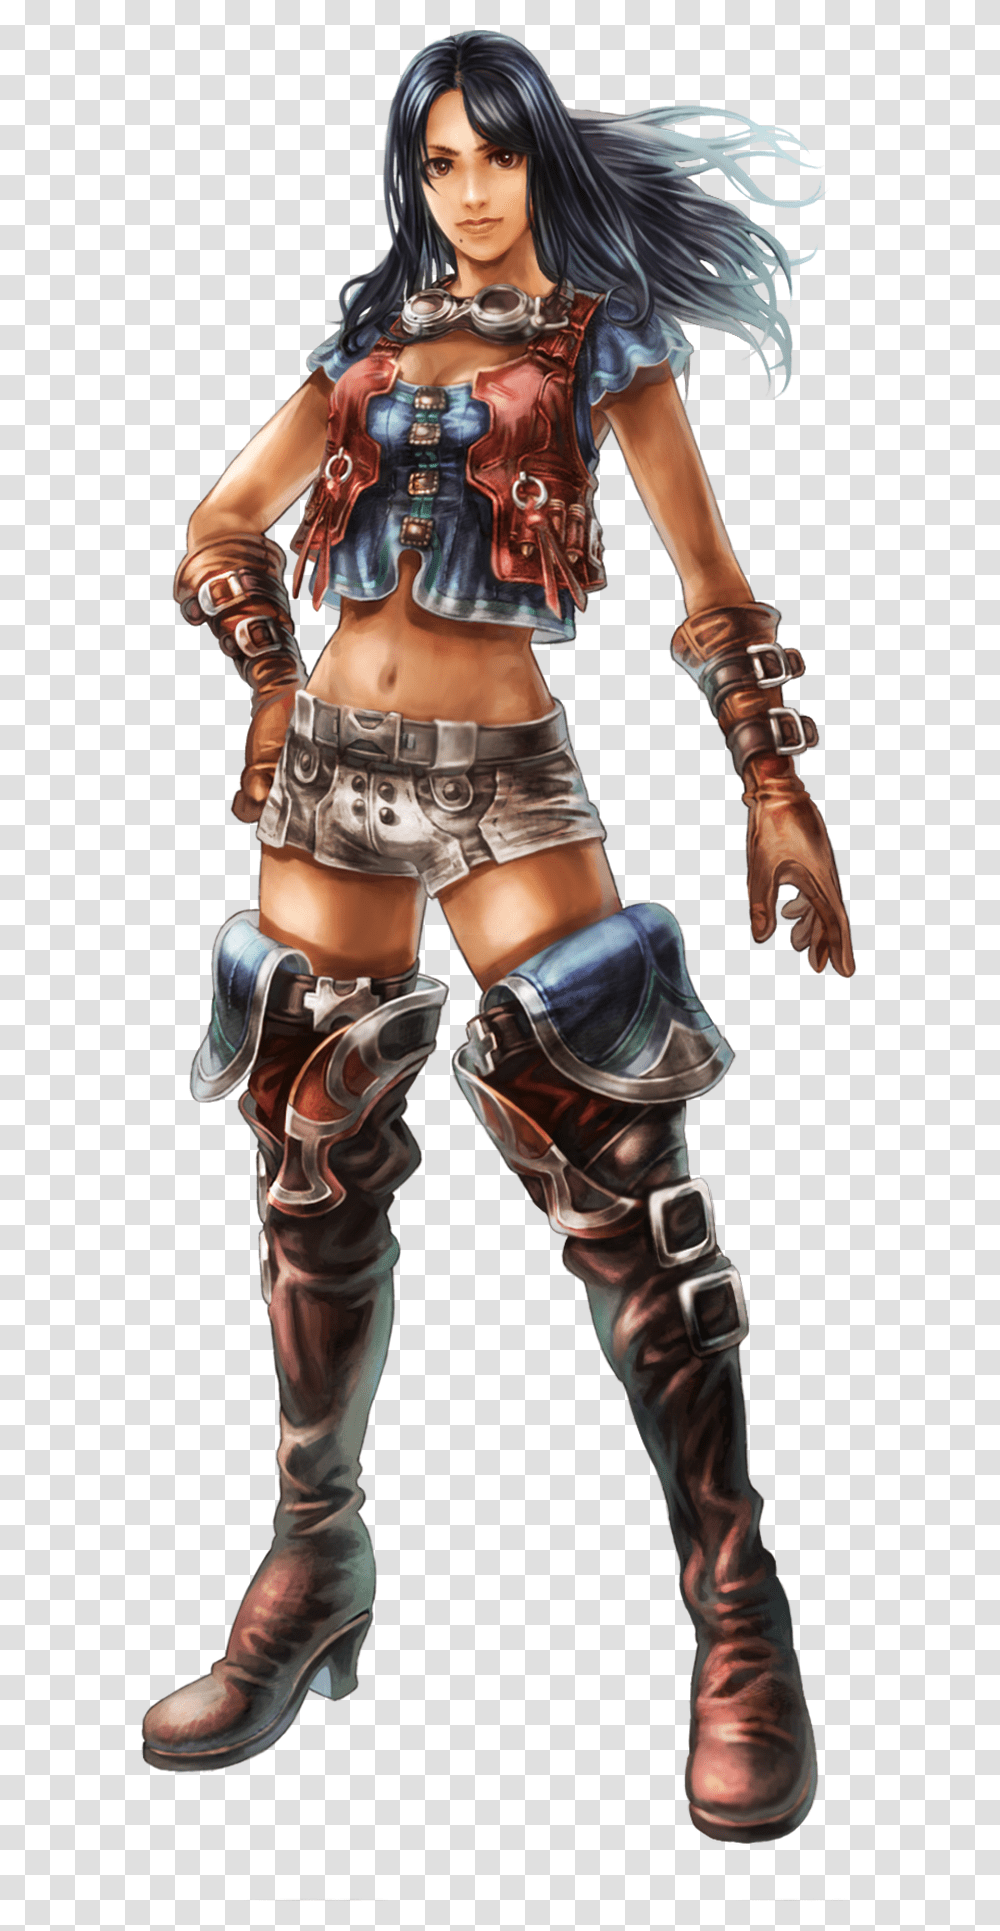 Official Artwork Of Sharla From Xenoblade Chronicles Sharla Xenoblade, Costume, Person, Duel Transparent Png